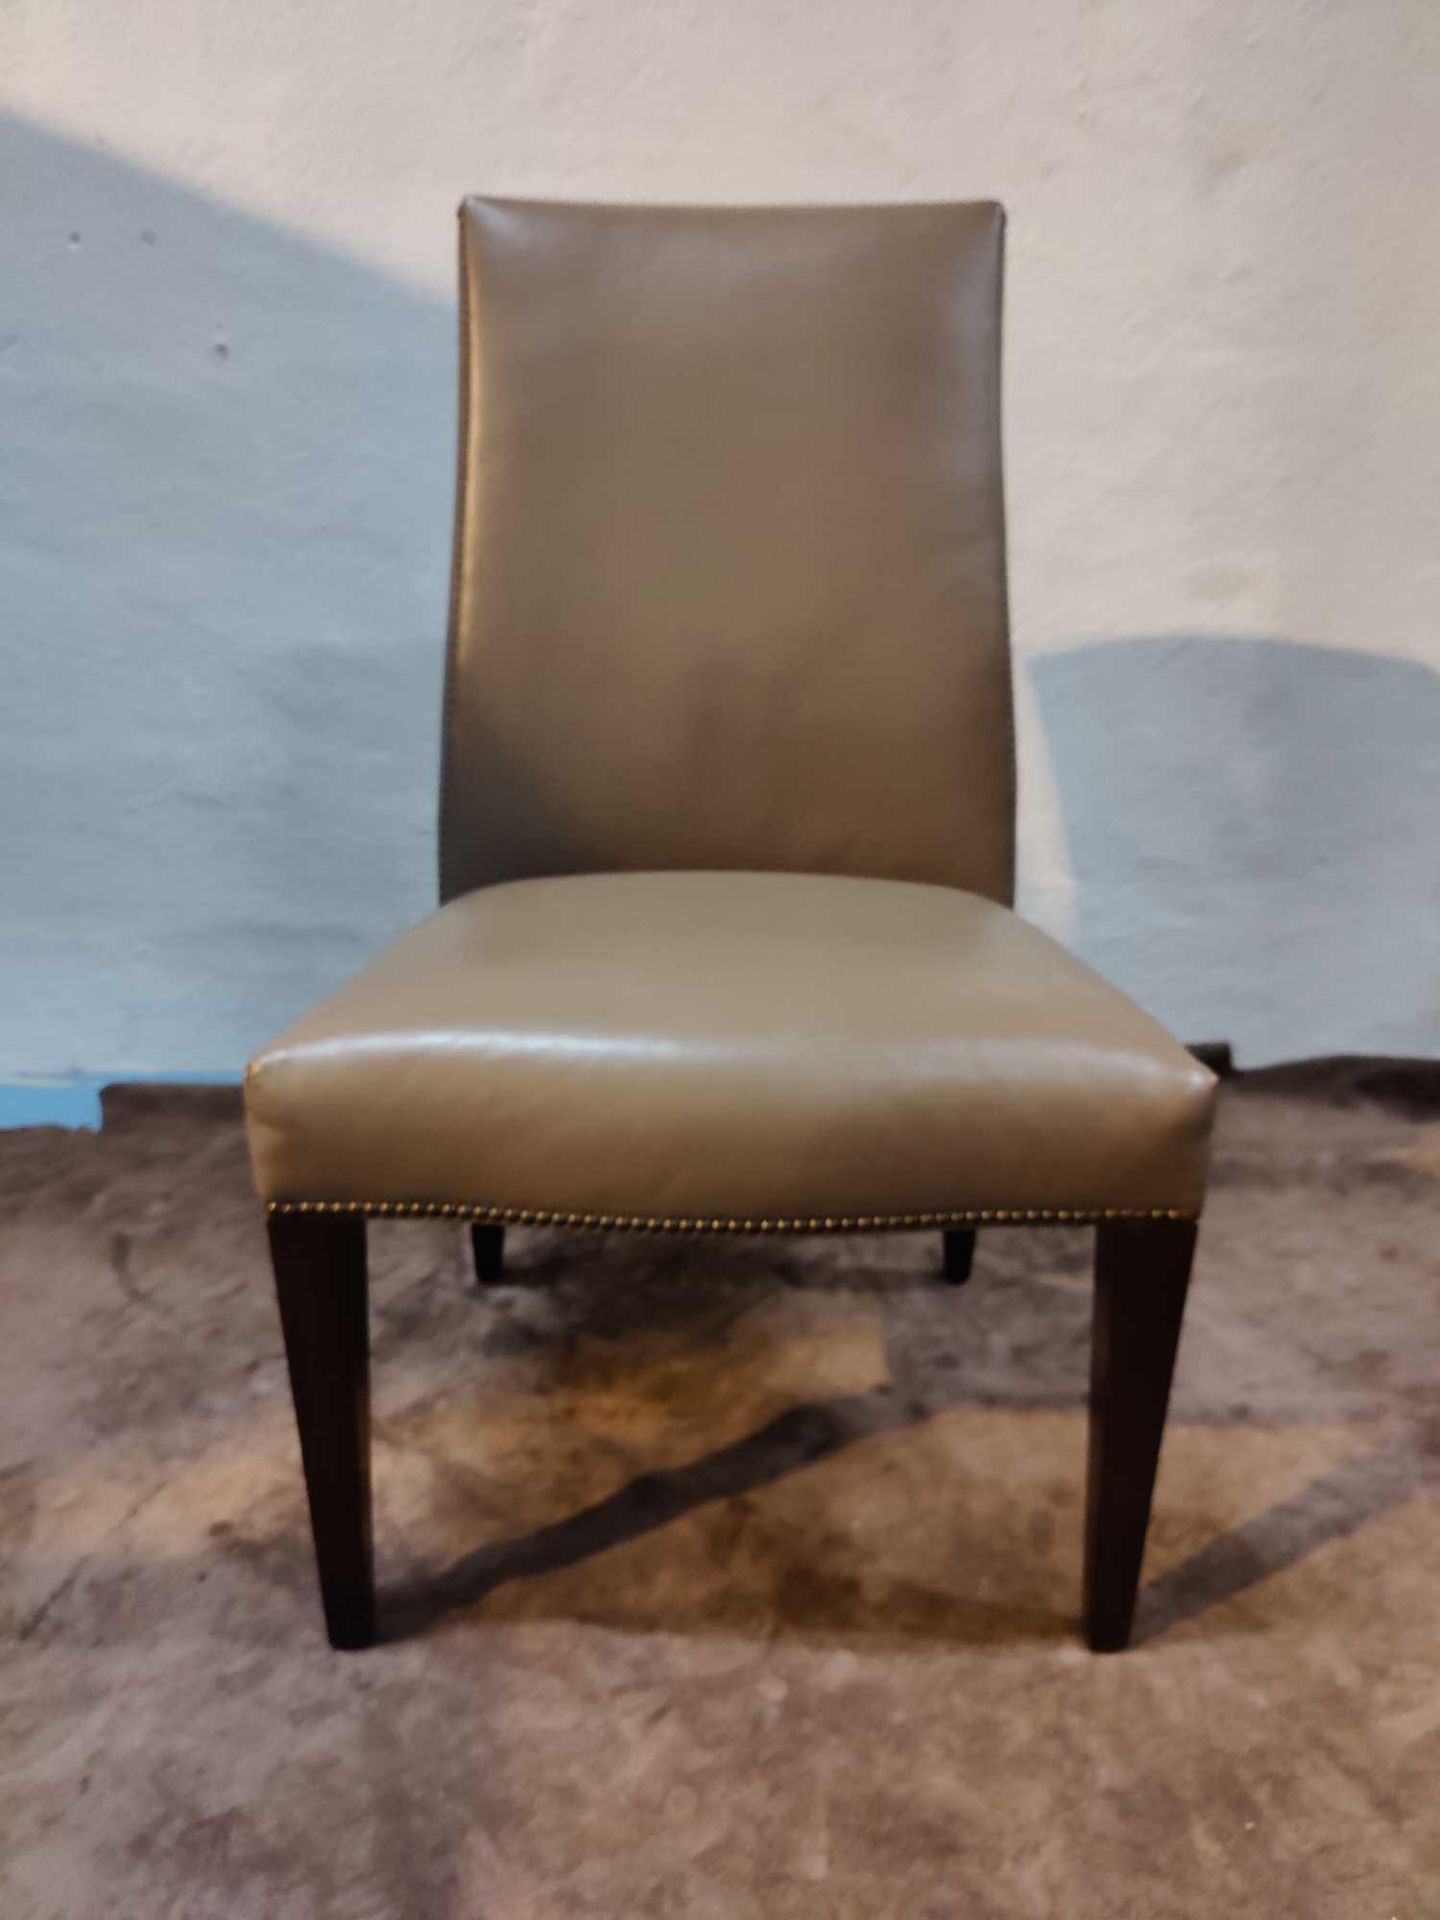 A Pair Of Leather Tall Back Side Chairs With Pin Detail Trimming 60 x 55 x 101cm - Image 2 of 3